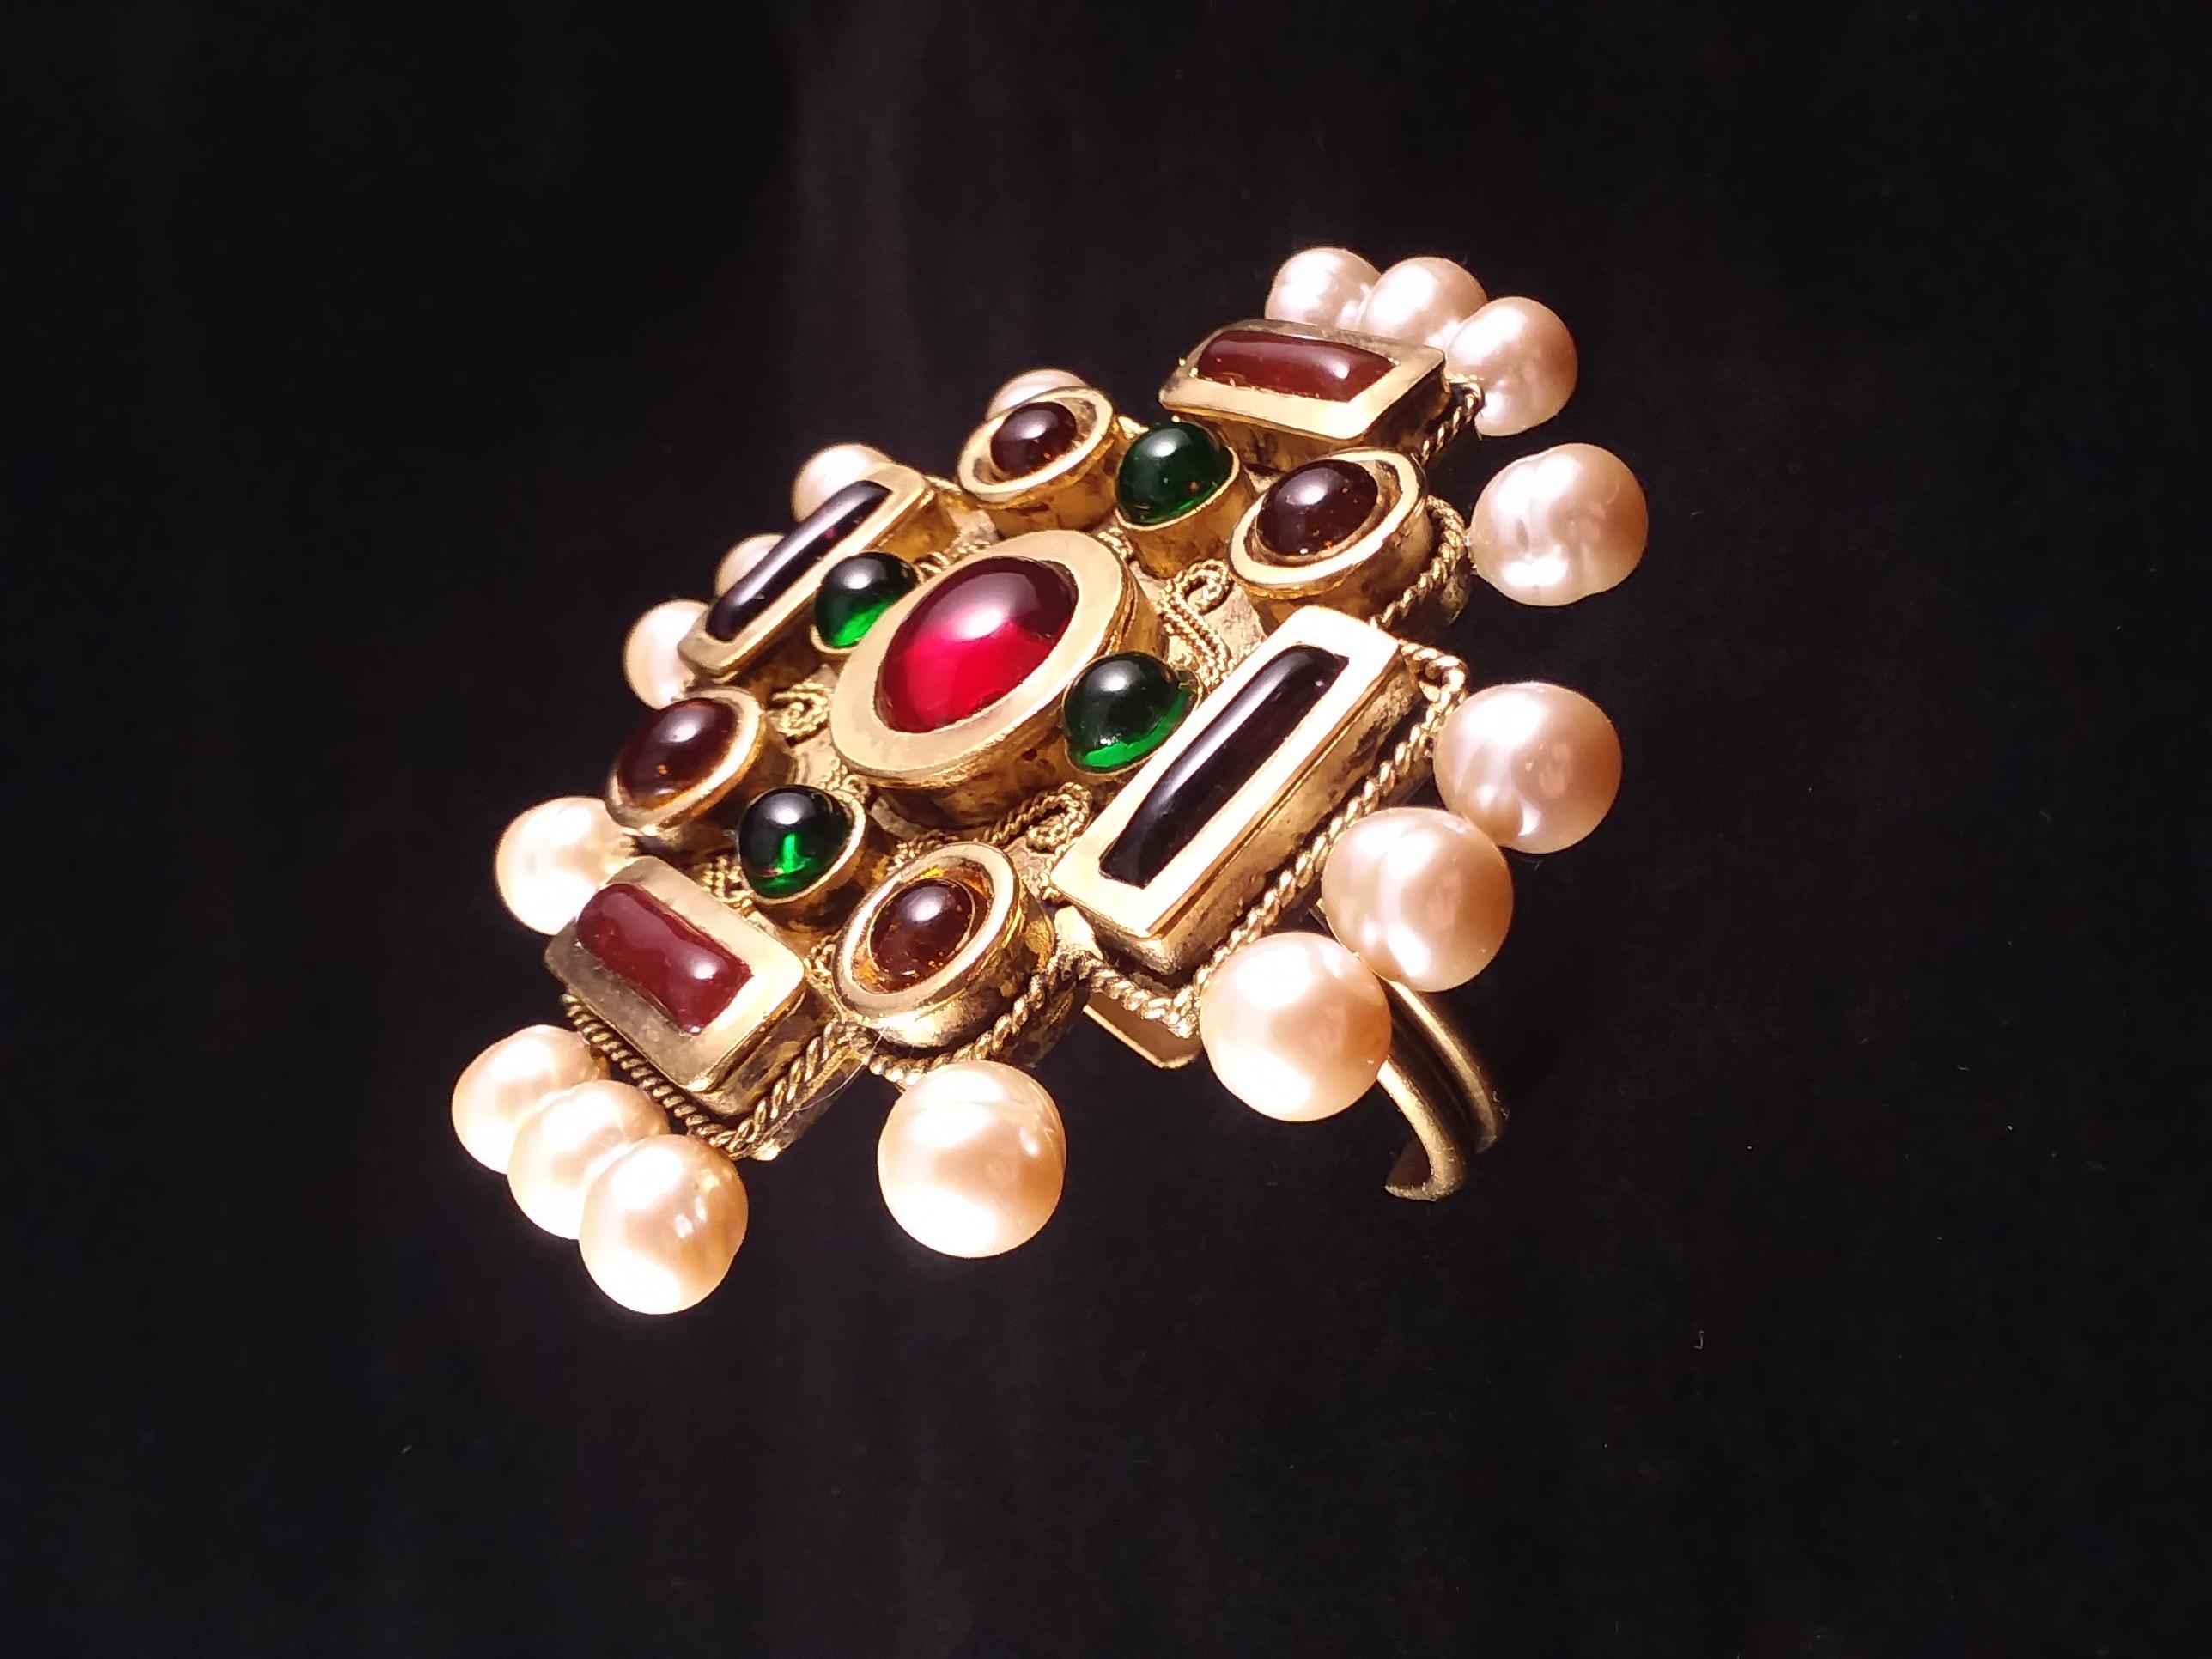 Maison Gripoix for Chanel Byzantine Cruciform Cuff Bracelet In Excellent Condition For Sale In New York, NY